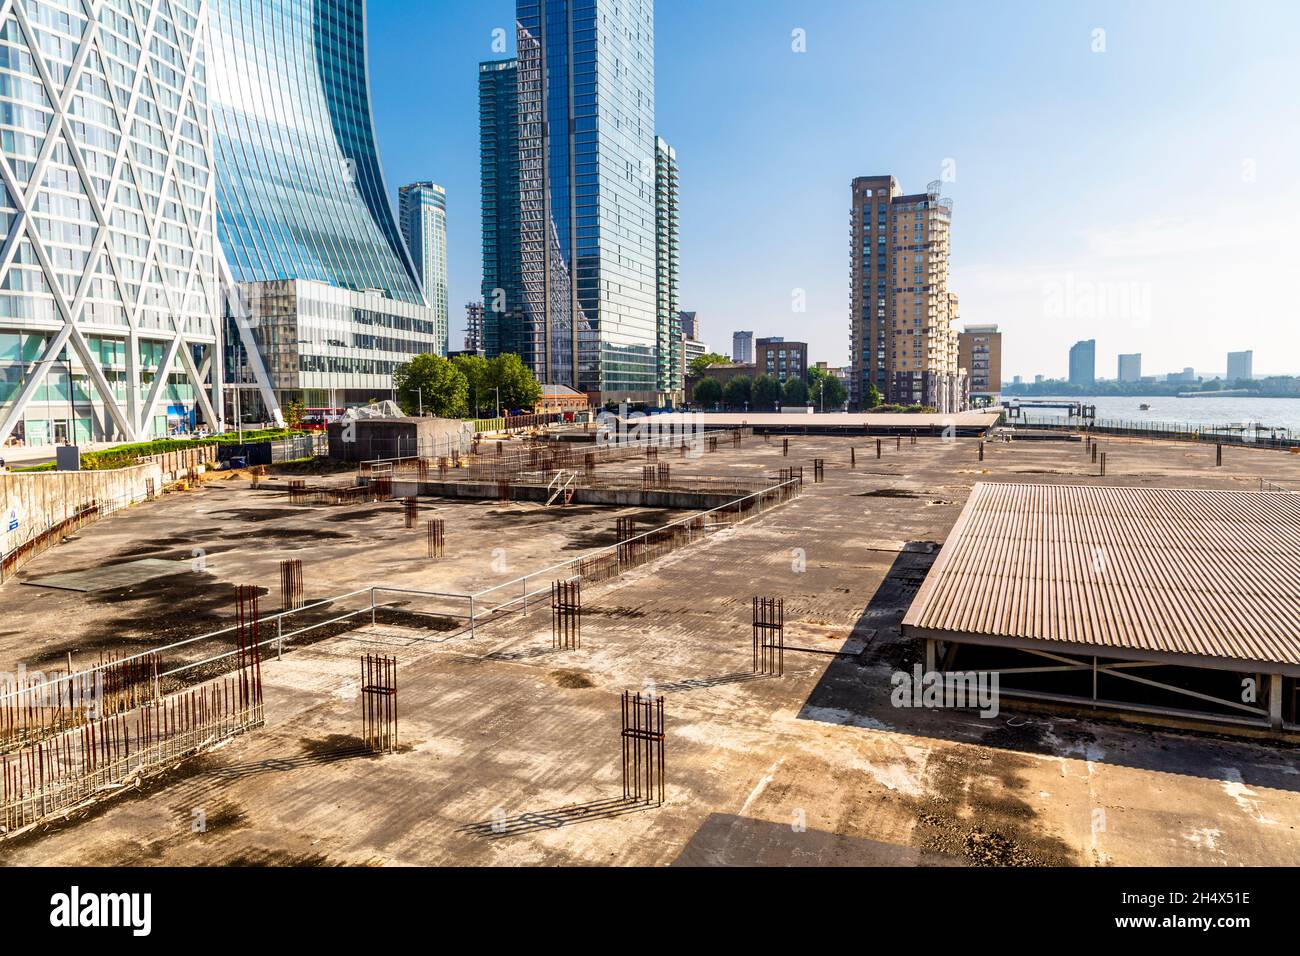 Stalled construction site of the Riverside South development project, Westferry Circus, Canary Wharf, London, UK Stock Photo